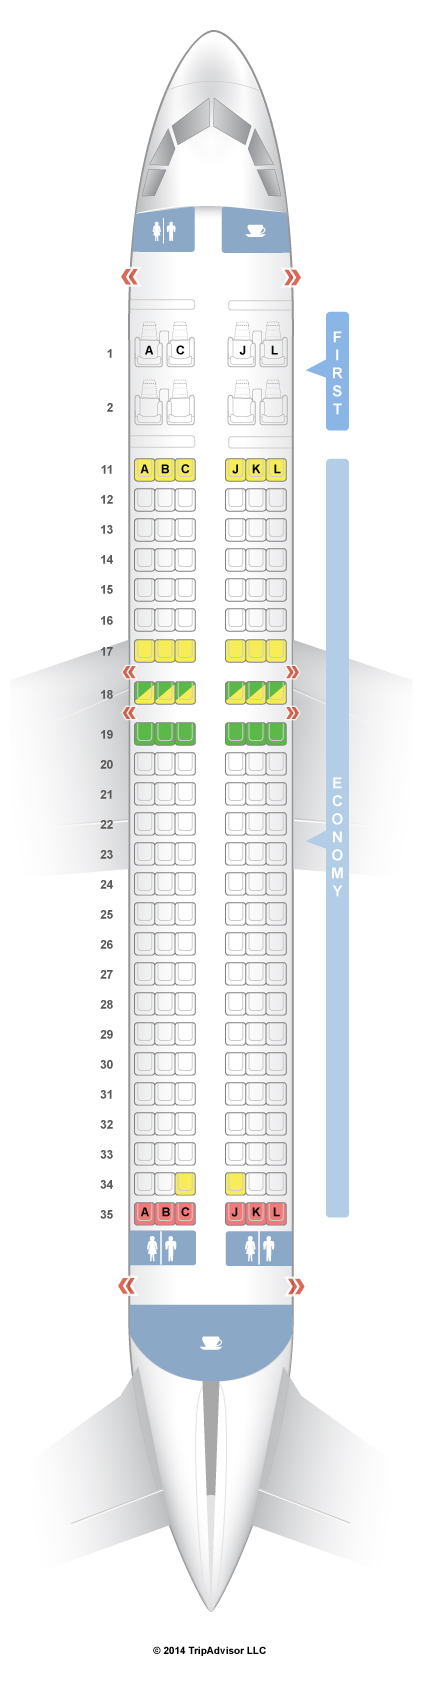 Plane Seating Chart American Airlines